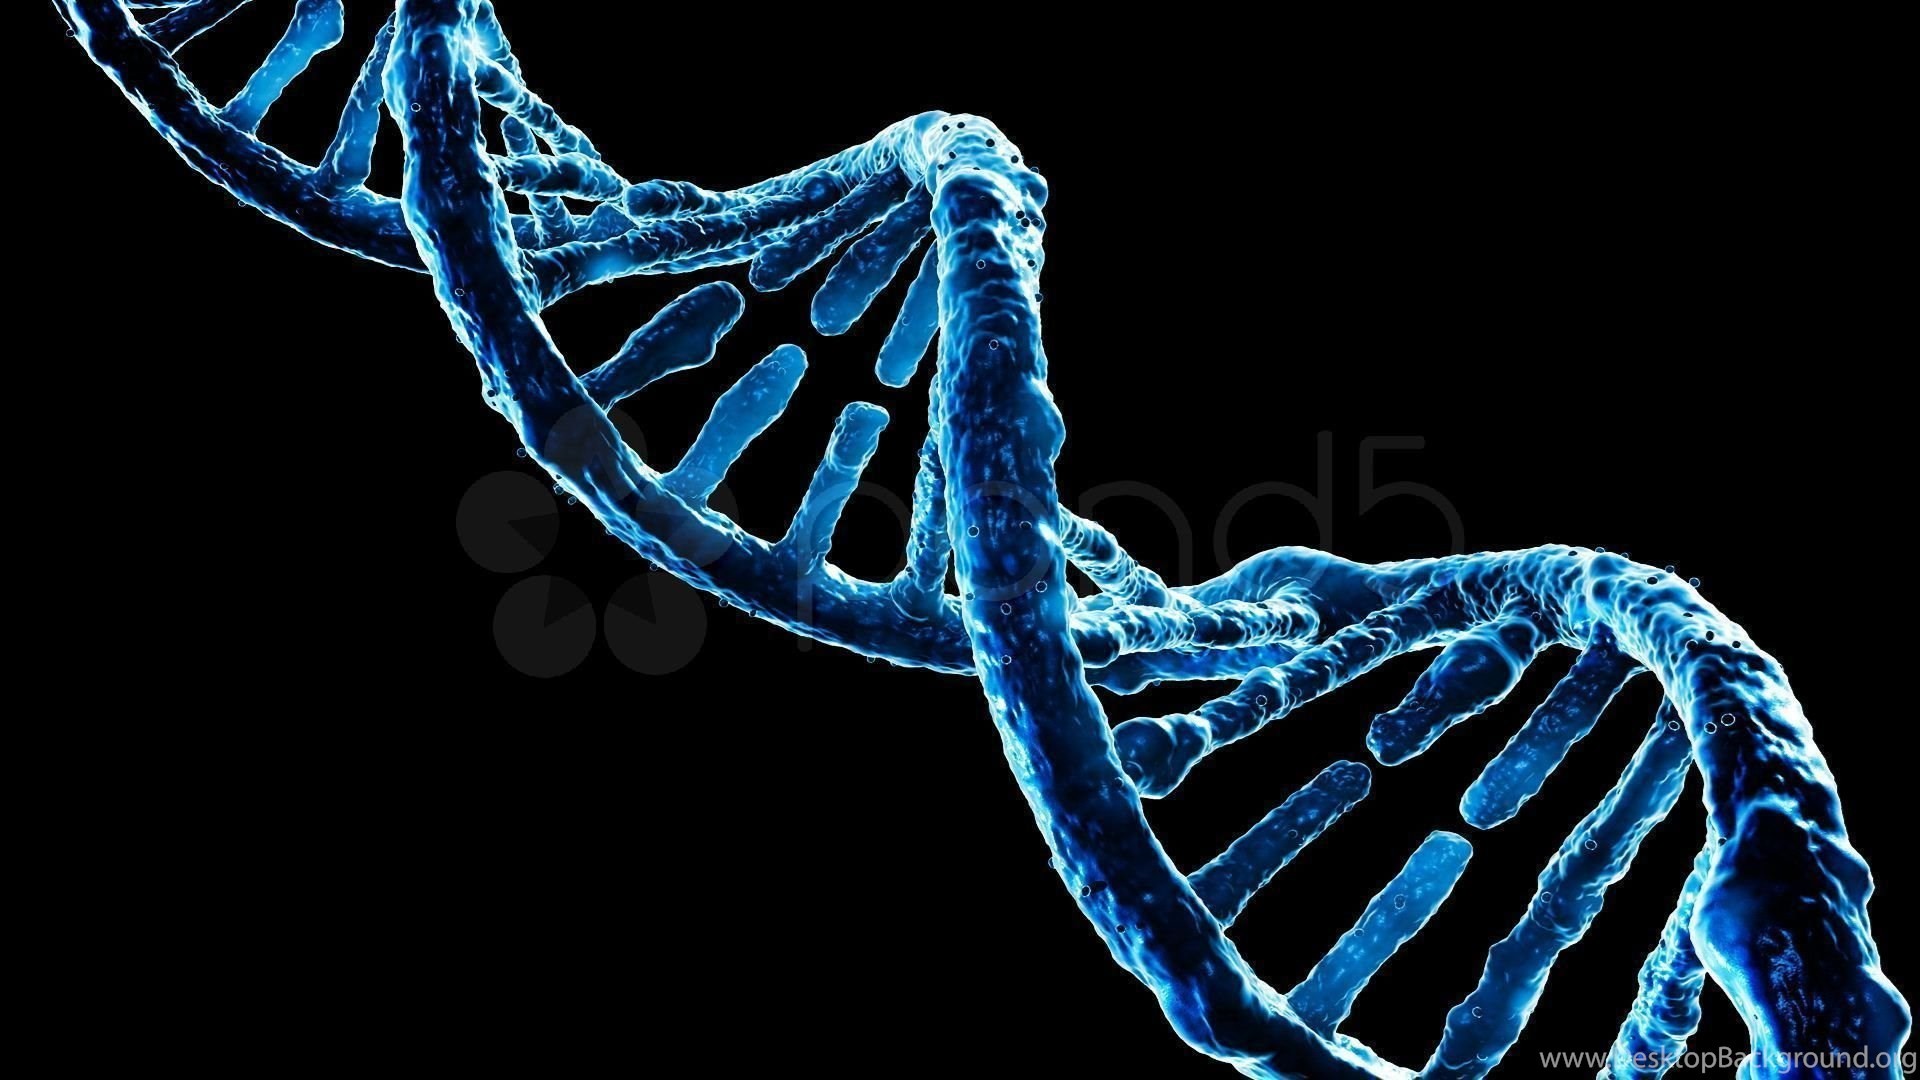 1920x1080 HD Quality Cool DNA Desktop Wallpapers 13 SiWallpapers 11438